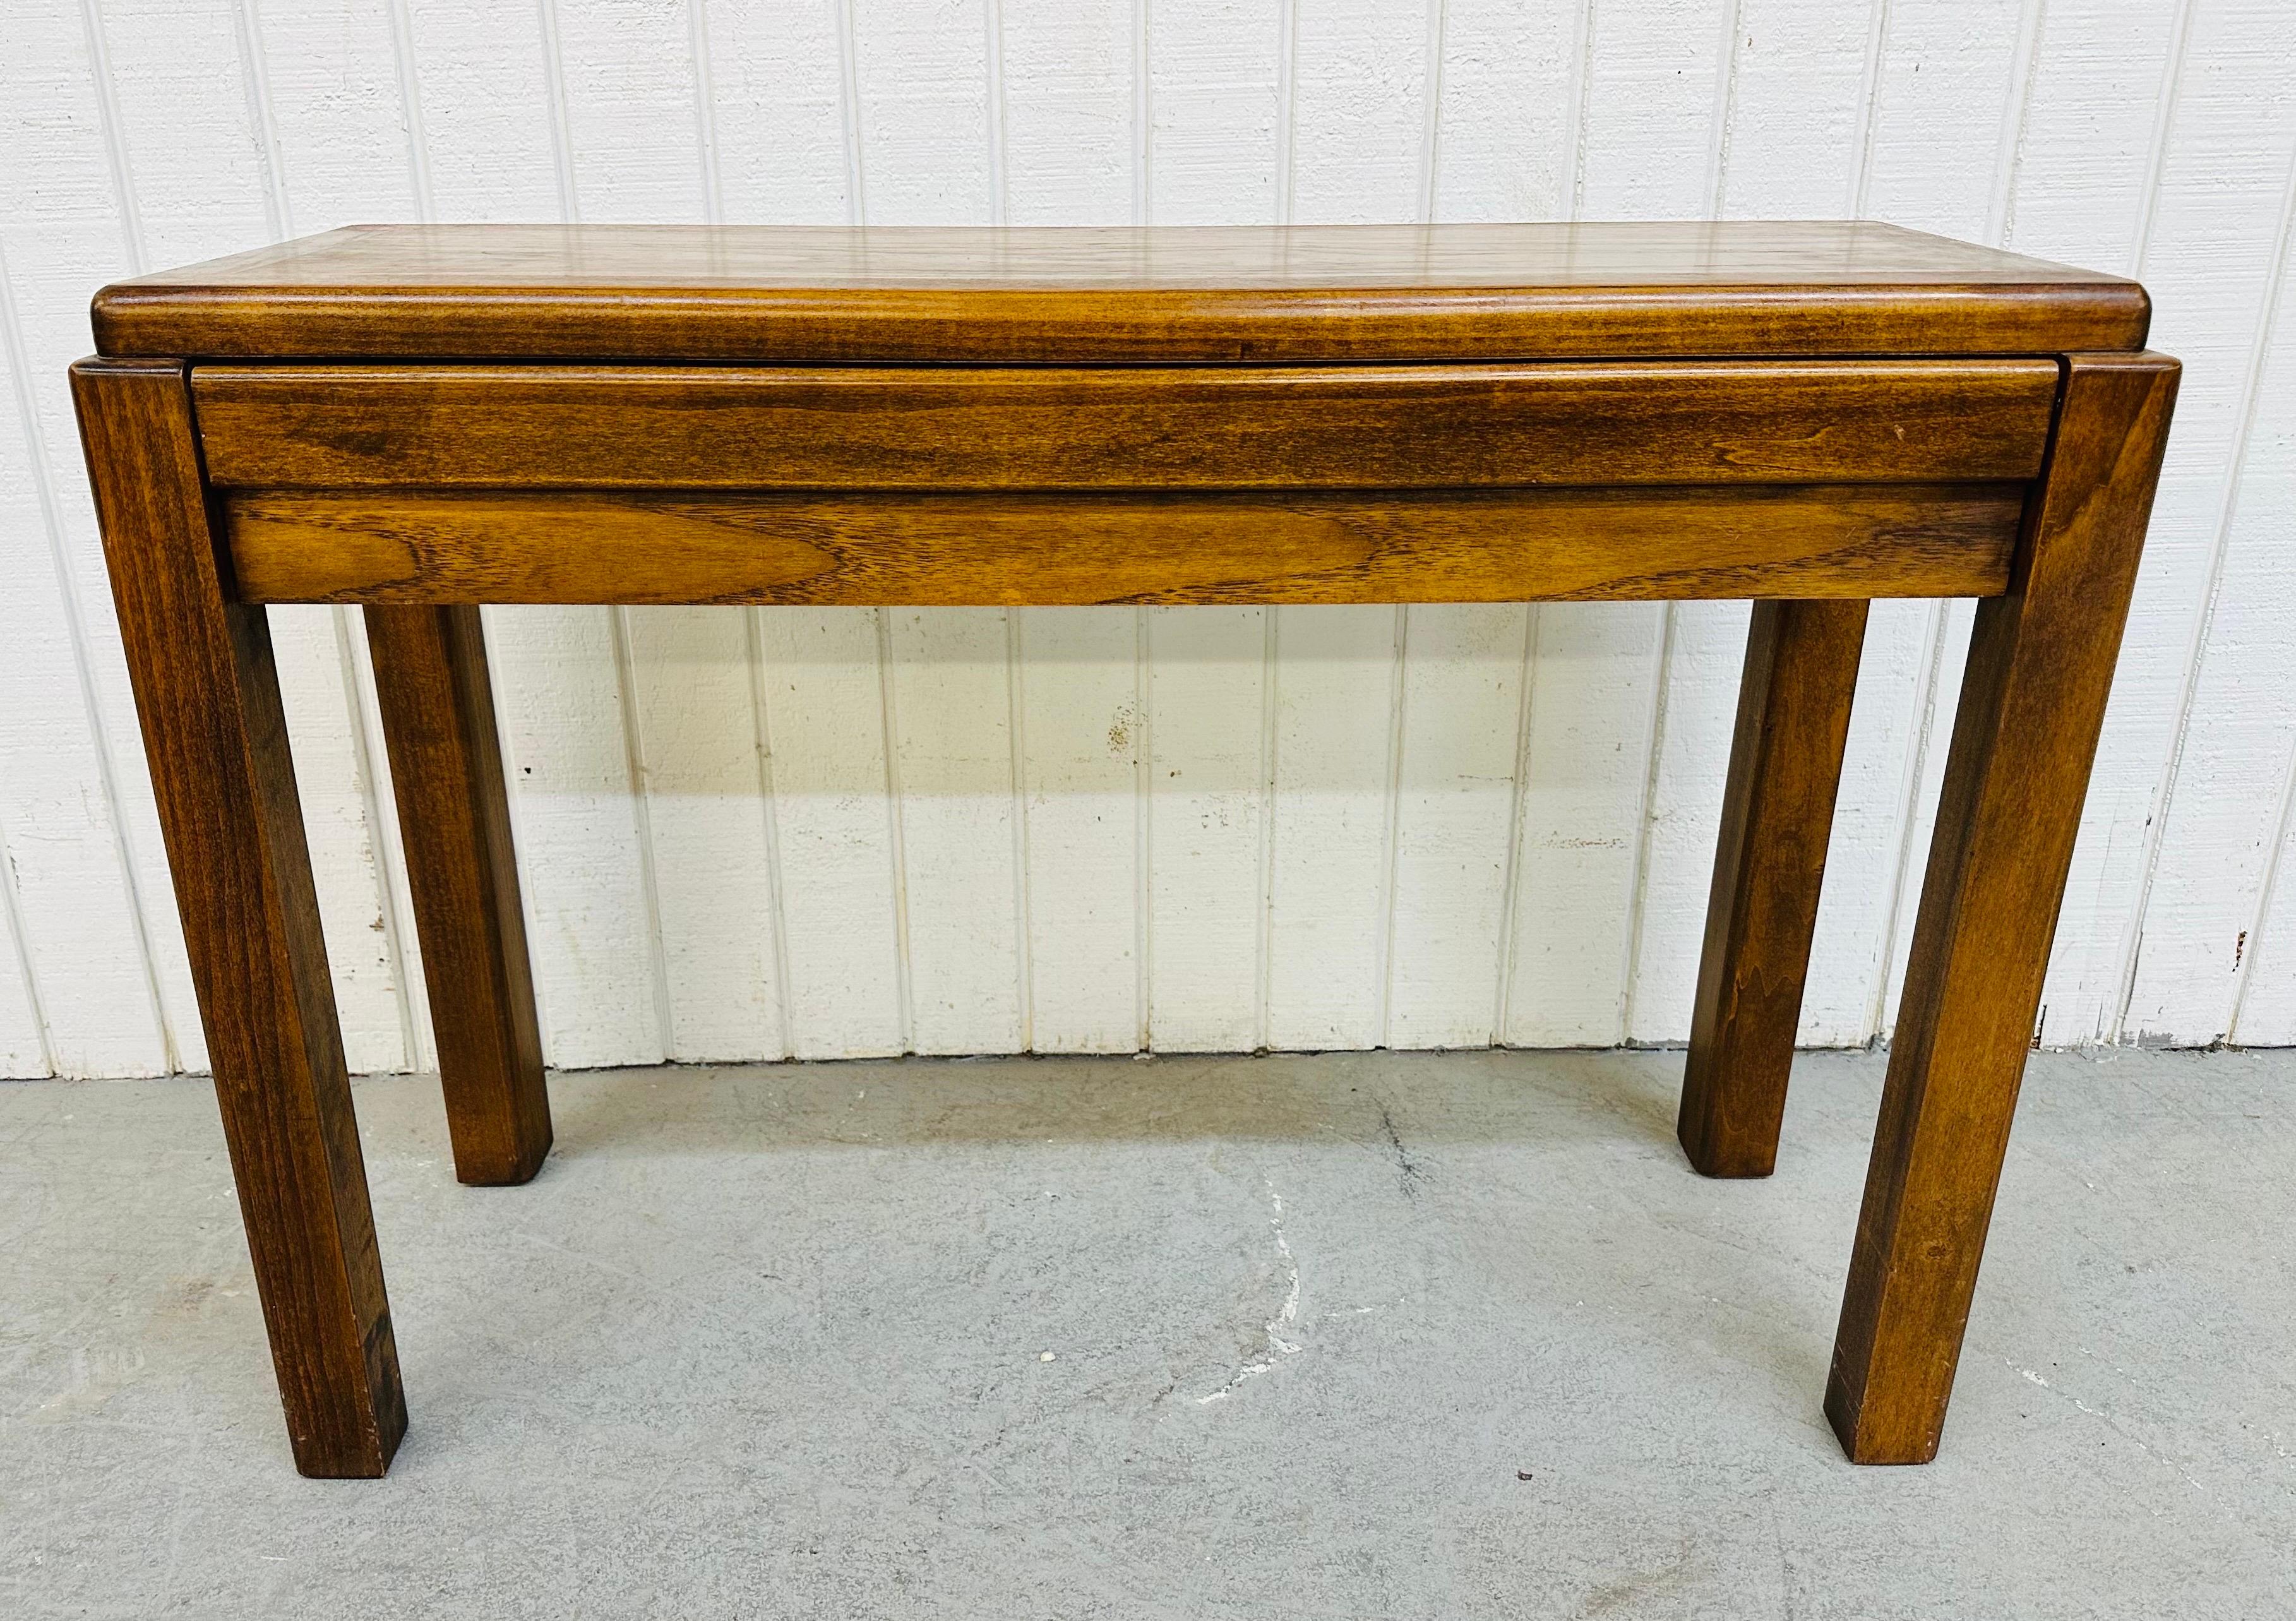 This listing is for a vintage Lane Walnut Console Table. Featuring a straight line design, rectangular top, corner legs, and a single hidden drawer that pulls out for storage. This is an exceptional combination of quality and design by Lane.